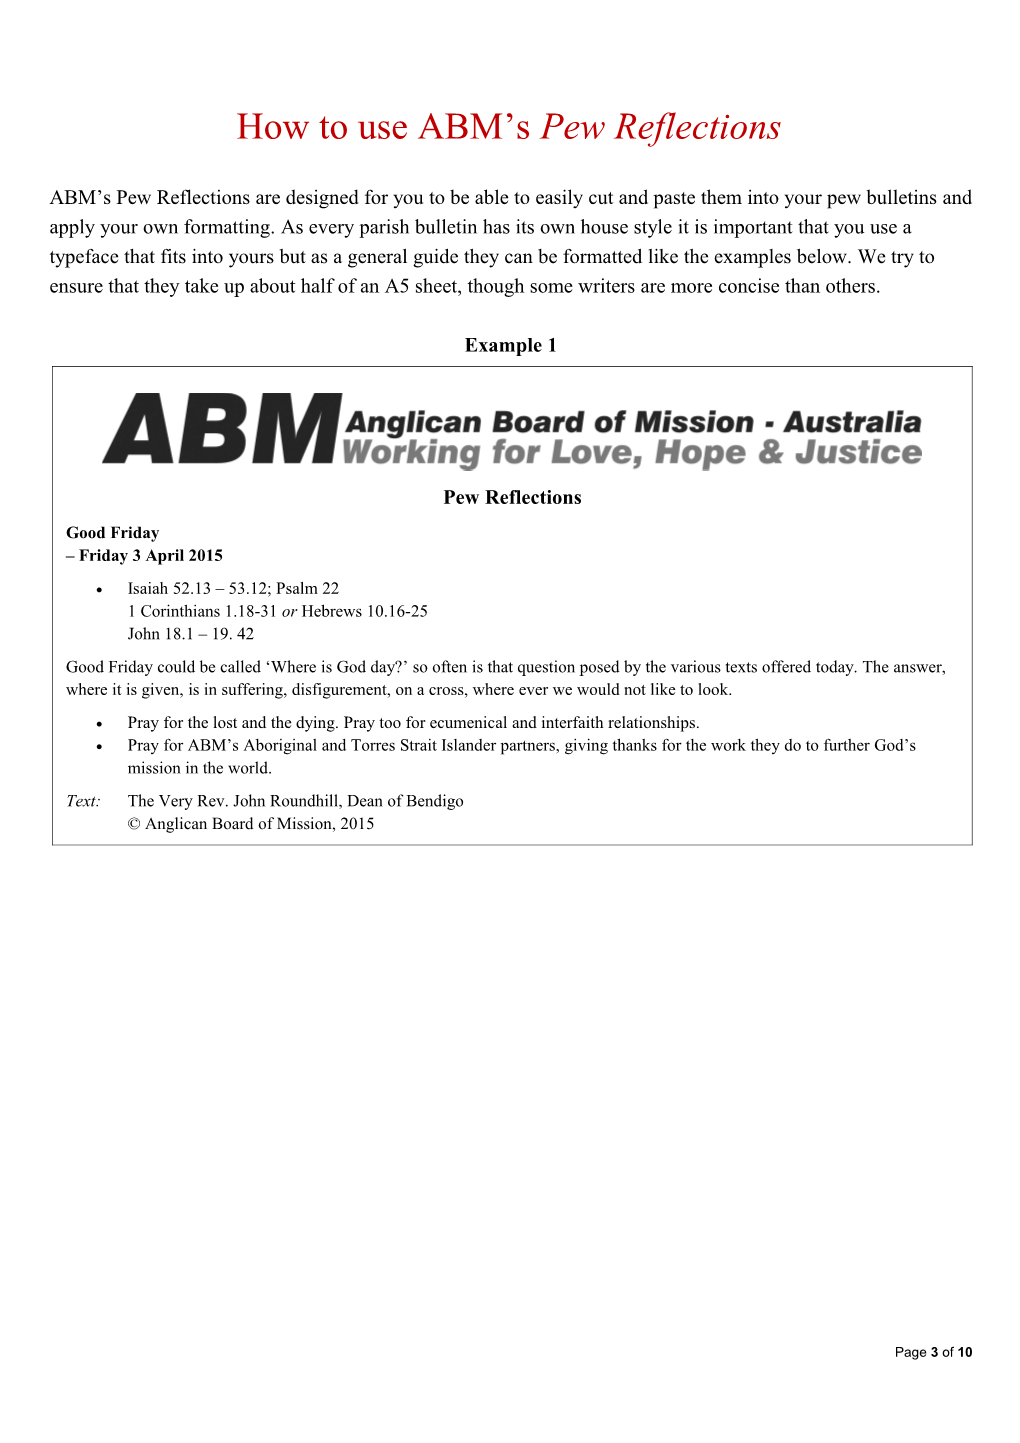 I Am Delighted to Be Able to Present the Final Quarter S Set of ABM S Pew Reflections for 2015